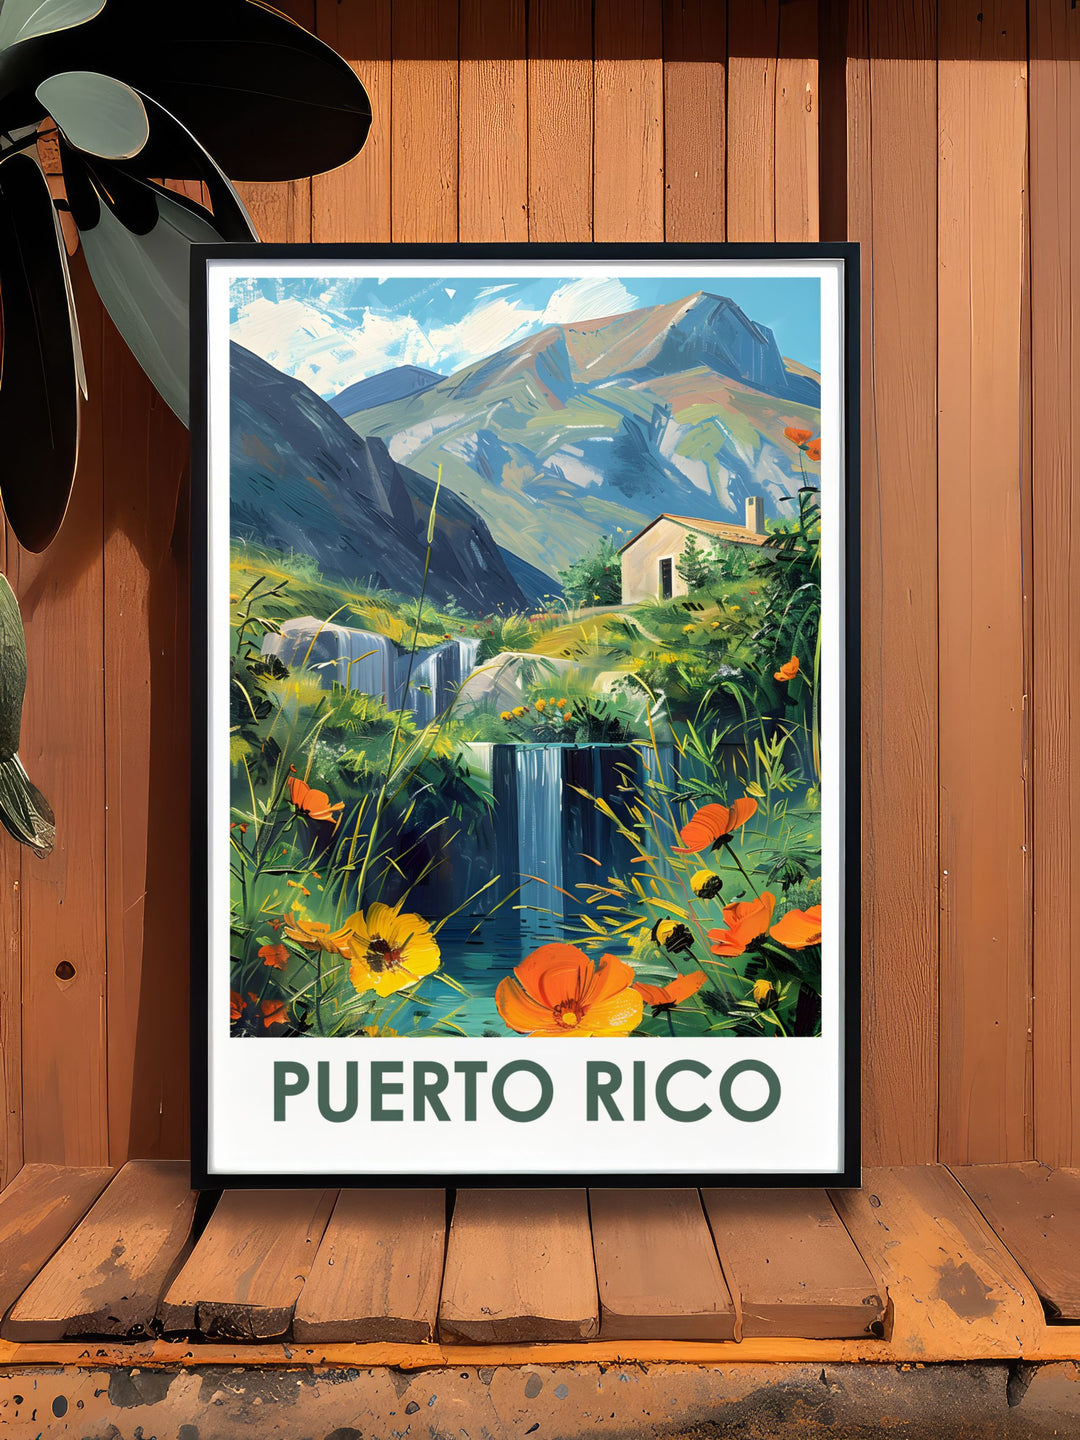 Unique Arecibo artwork and El Yunque National Forest prints. This travel poster brings the vibrant landscapes of Arecibo and the natural wonders of El Yunque into your home, making it a must have for art lovers and a perfect choice for personalized gifts.